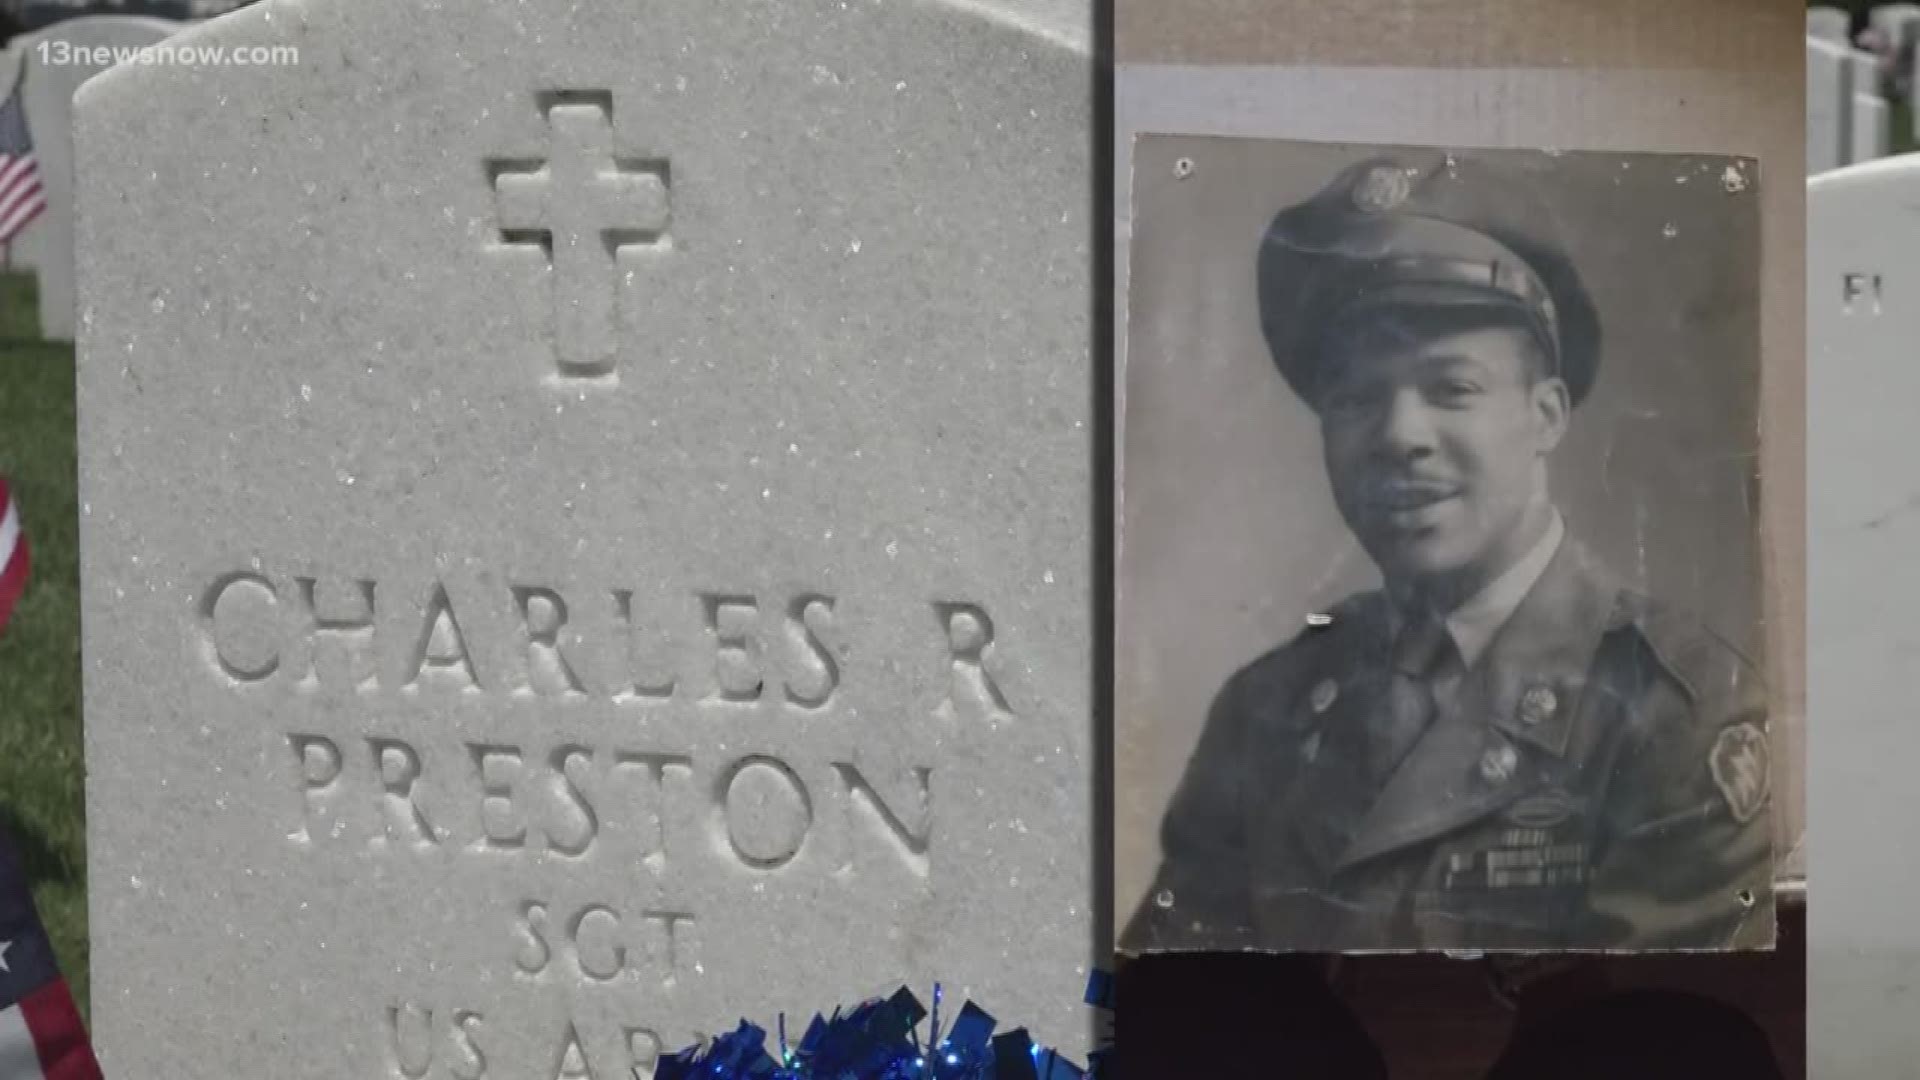 Charles Preston joined the army and served in World War II before joining the army. His children followed in his footsteps. Now they visit Charles's grave on Memorial Day.